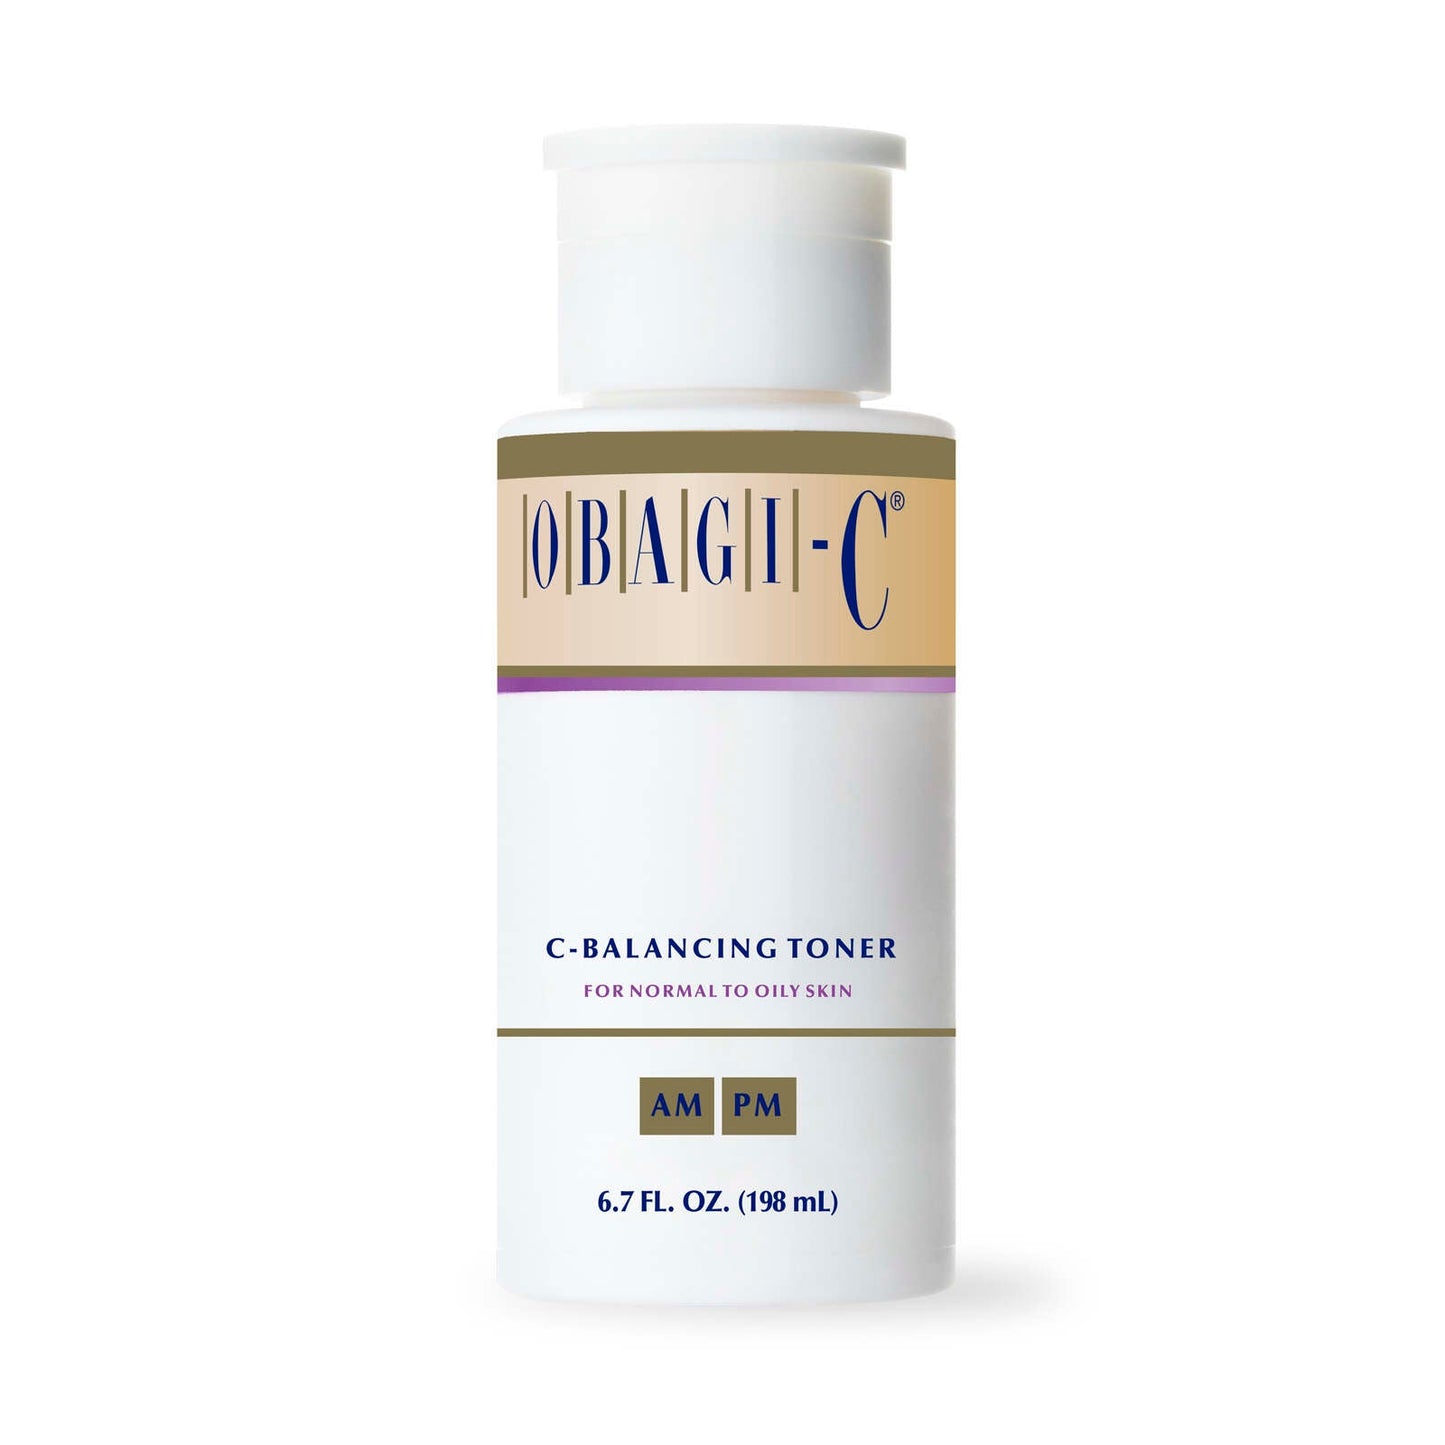 Buy Online Best OBAGI C-Balancing Toner | Buy innovative clinical skincare products - TOPBODY